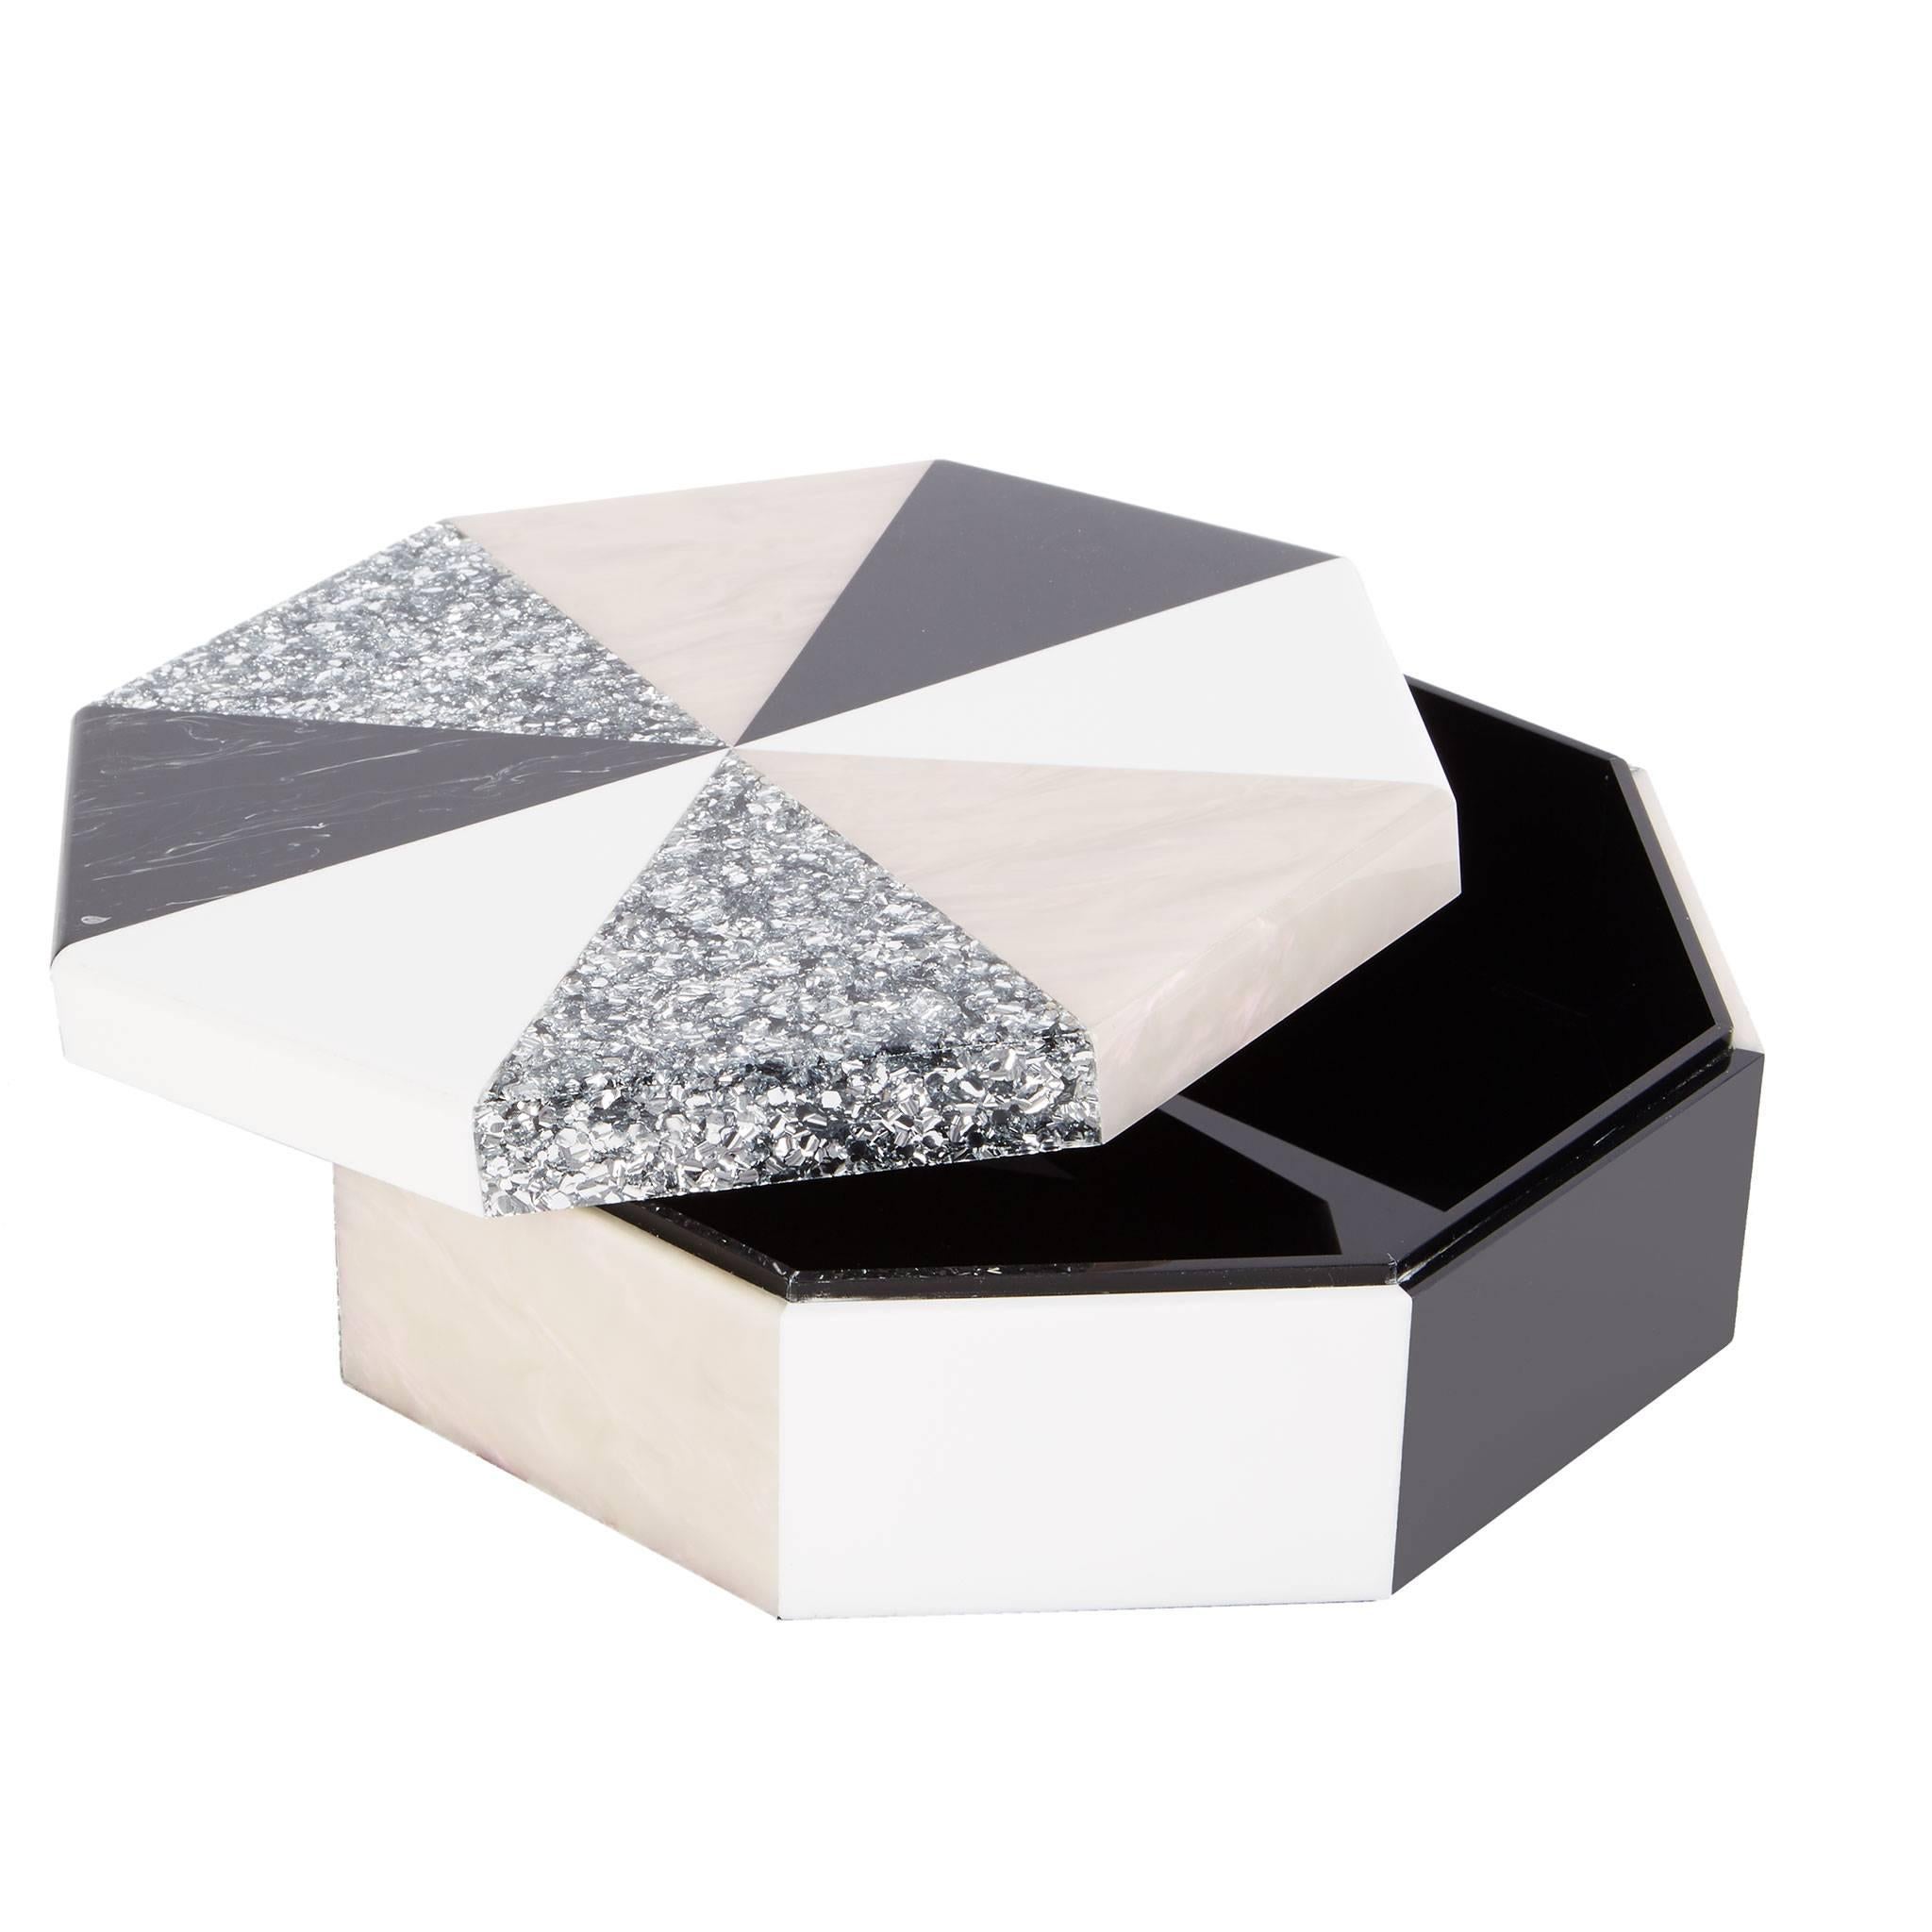 Octagon box in white, wonderstone, abalone, black and silver confetti. 

100% hand poured acrylic
Etched logo at base

Edie Parker products are handcrafted of the finest materials by skilled artisans. Any inconsistencies in the acrylic or other